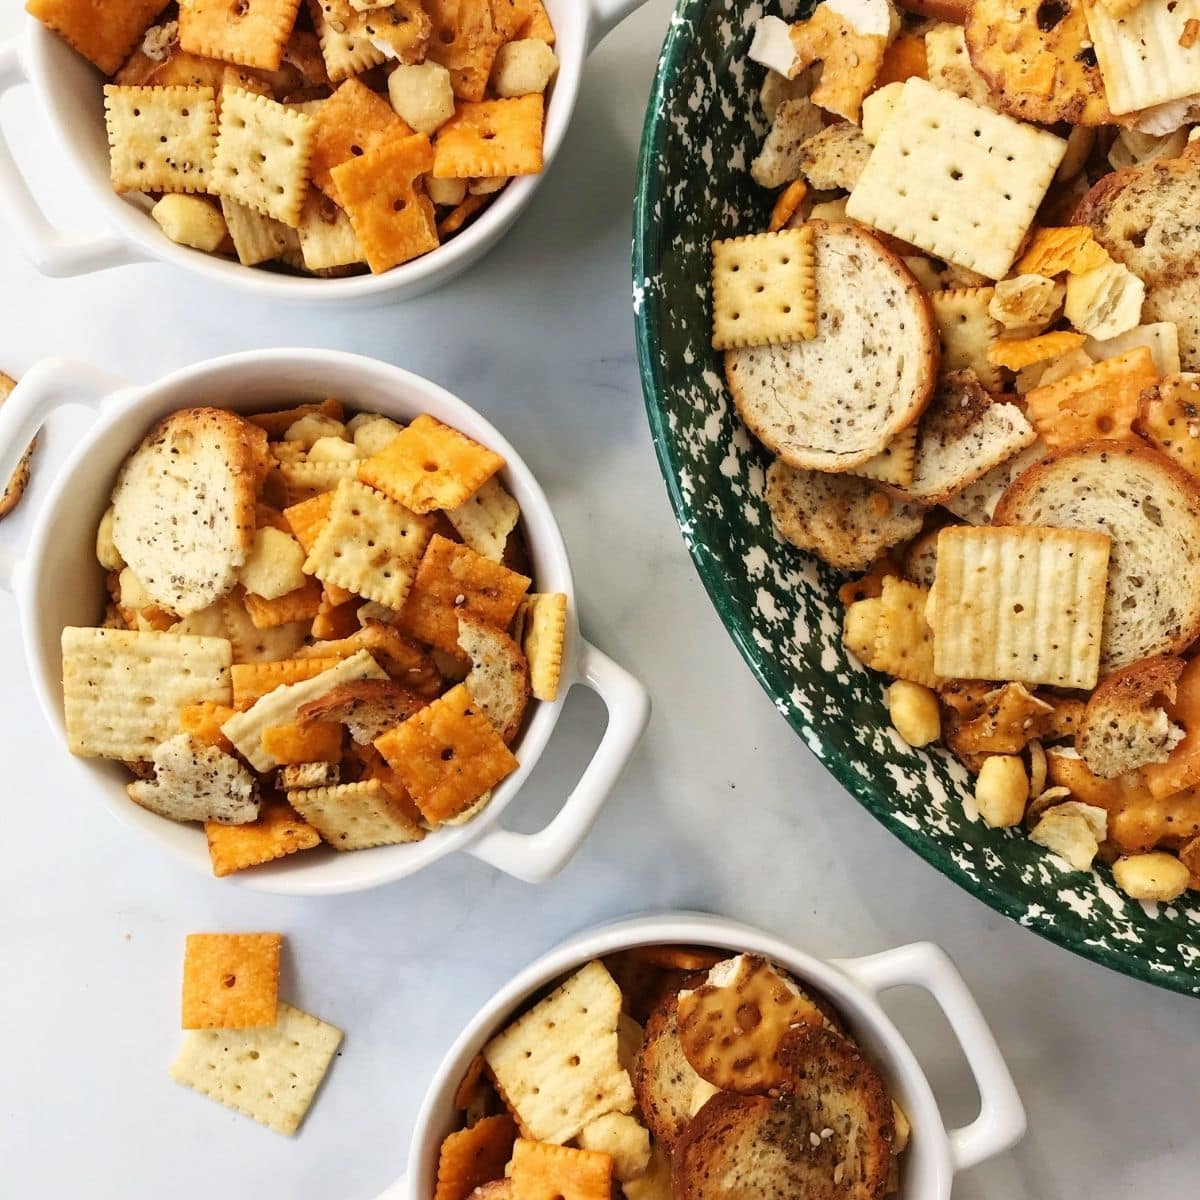 small and large bowls of snack mix